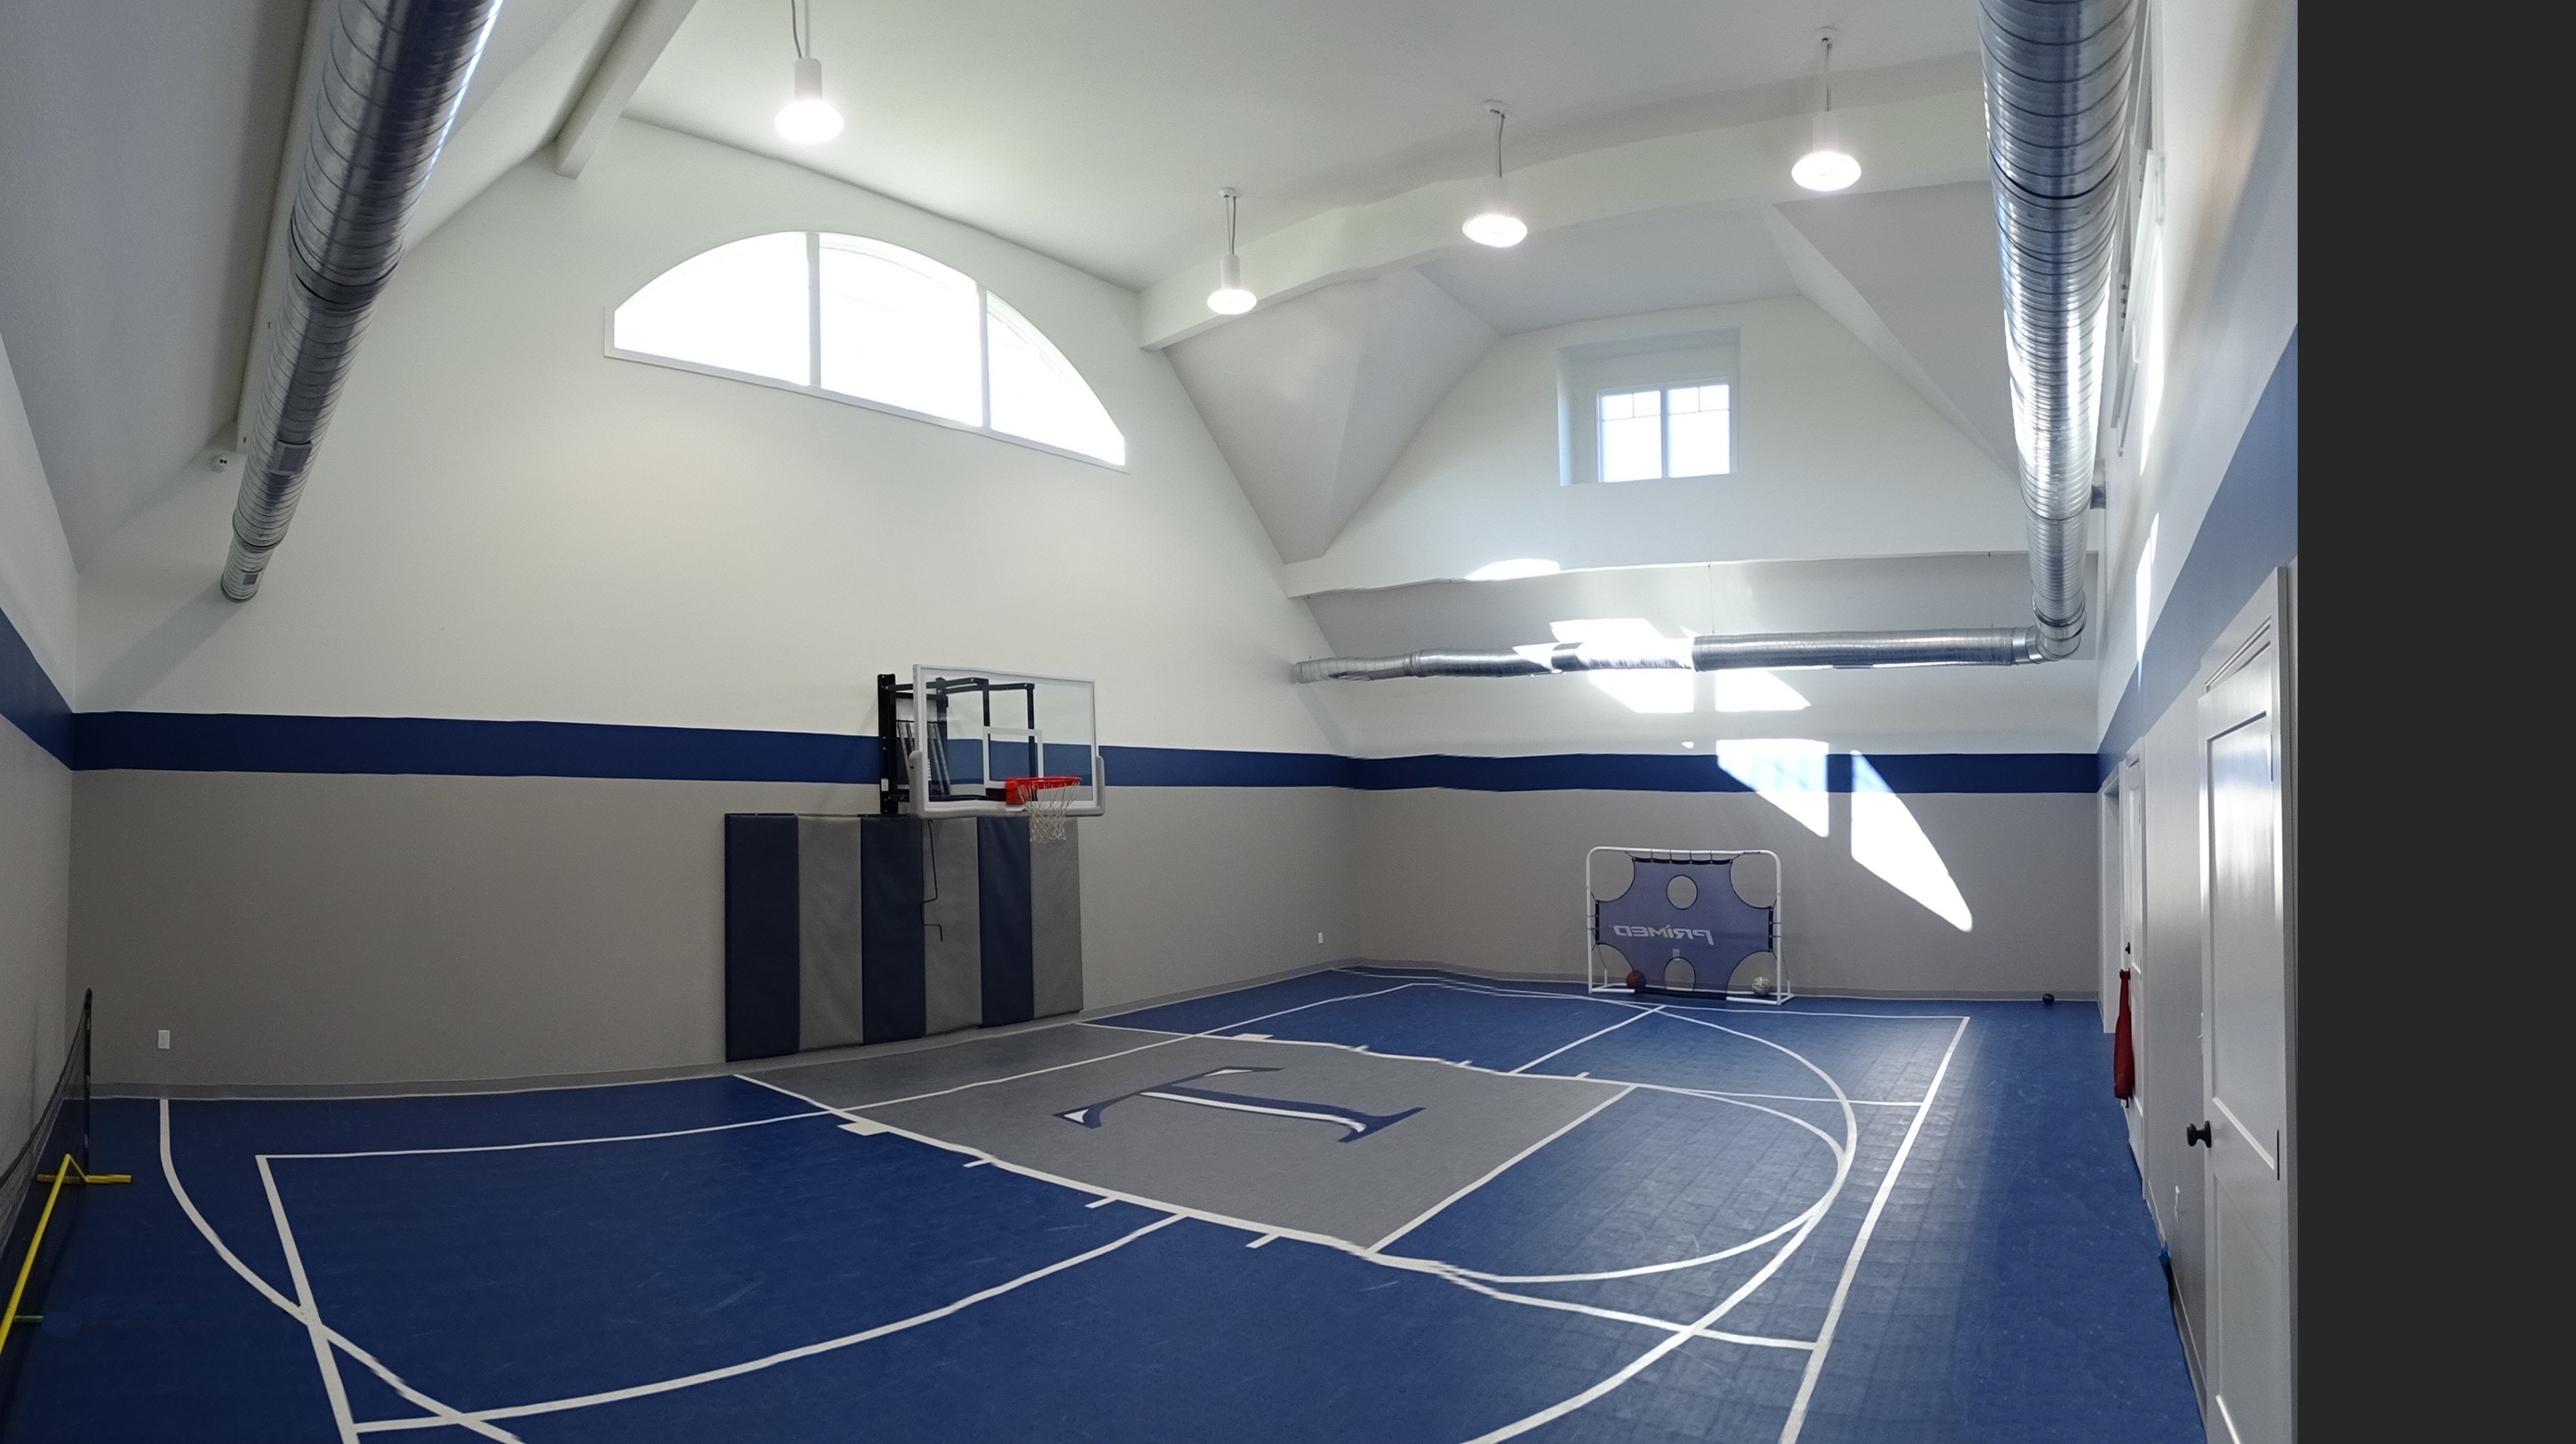 Interior view of basketball court